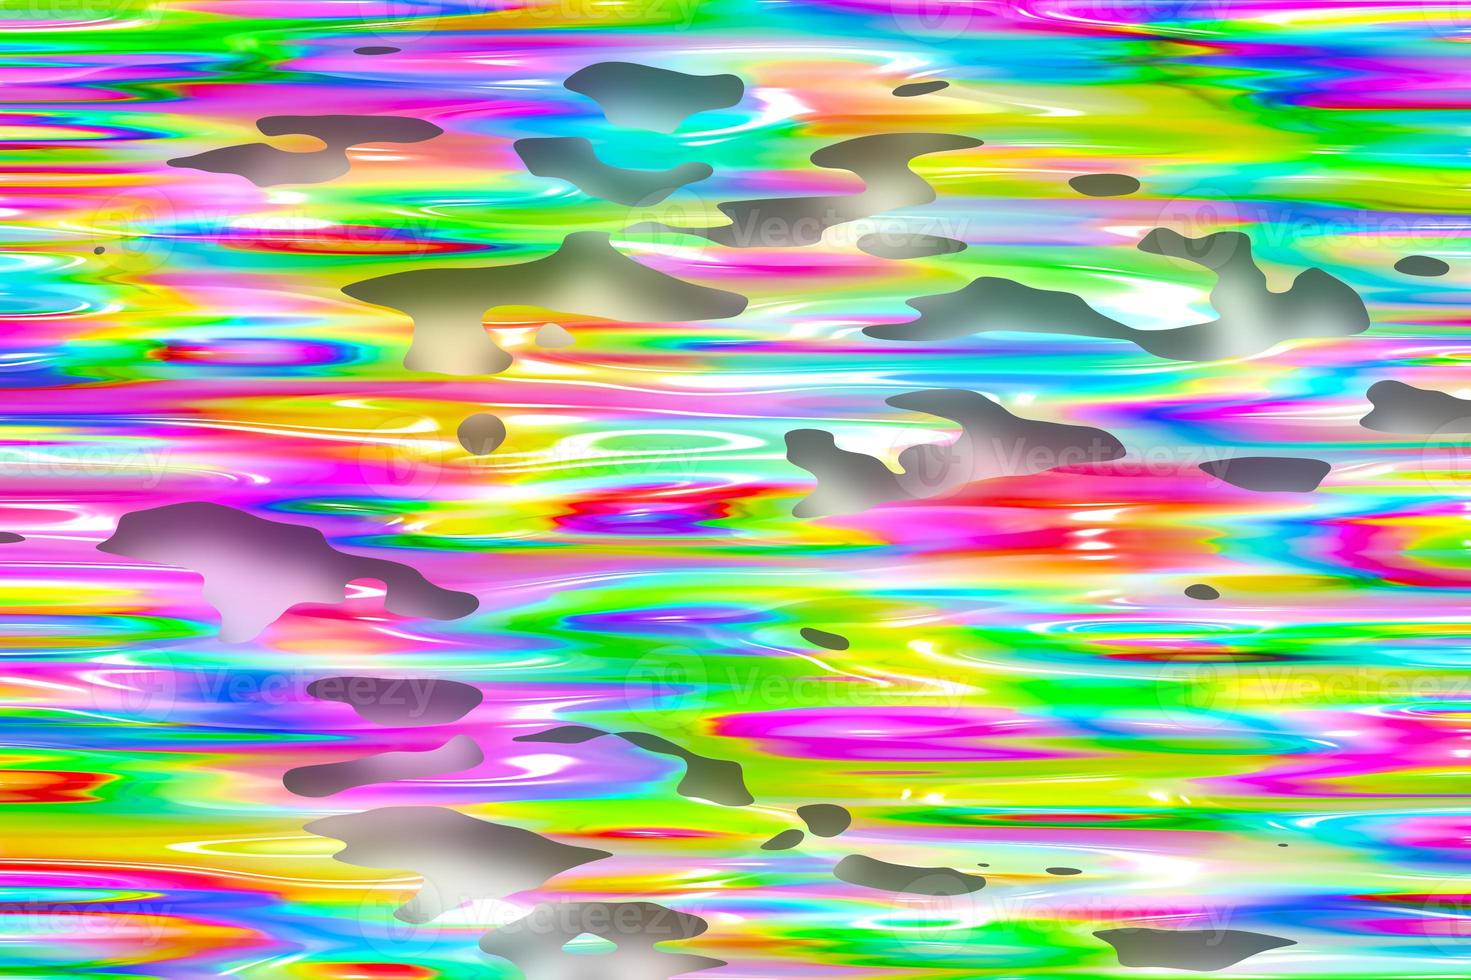 Abstract 3D gradient background,Holographic texture,Abstract liquid background,Geometric texture,Digital background illustration photo